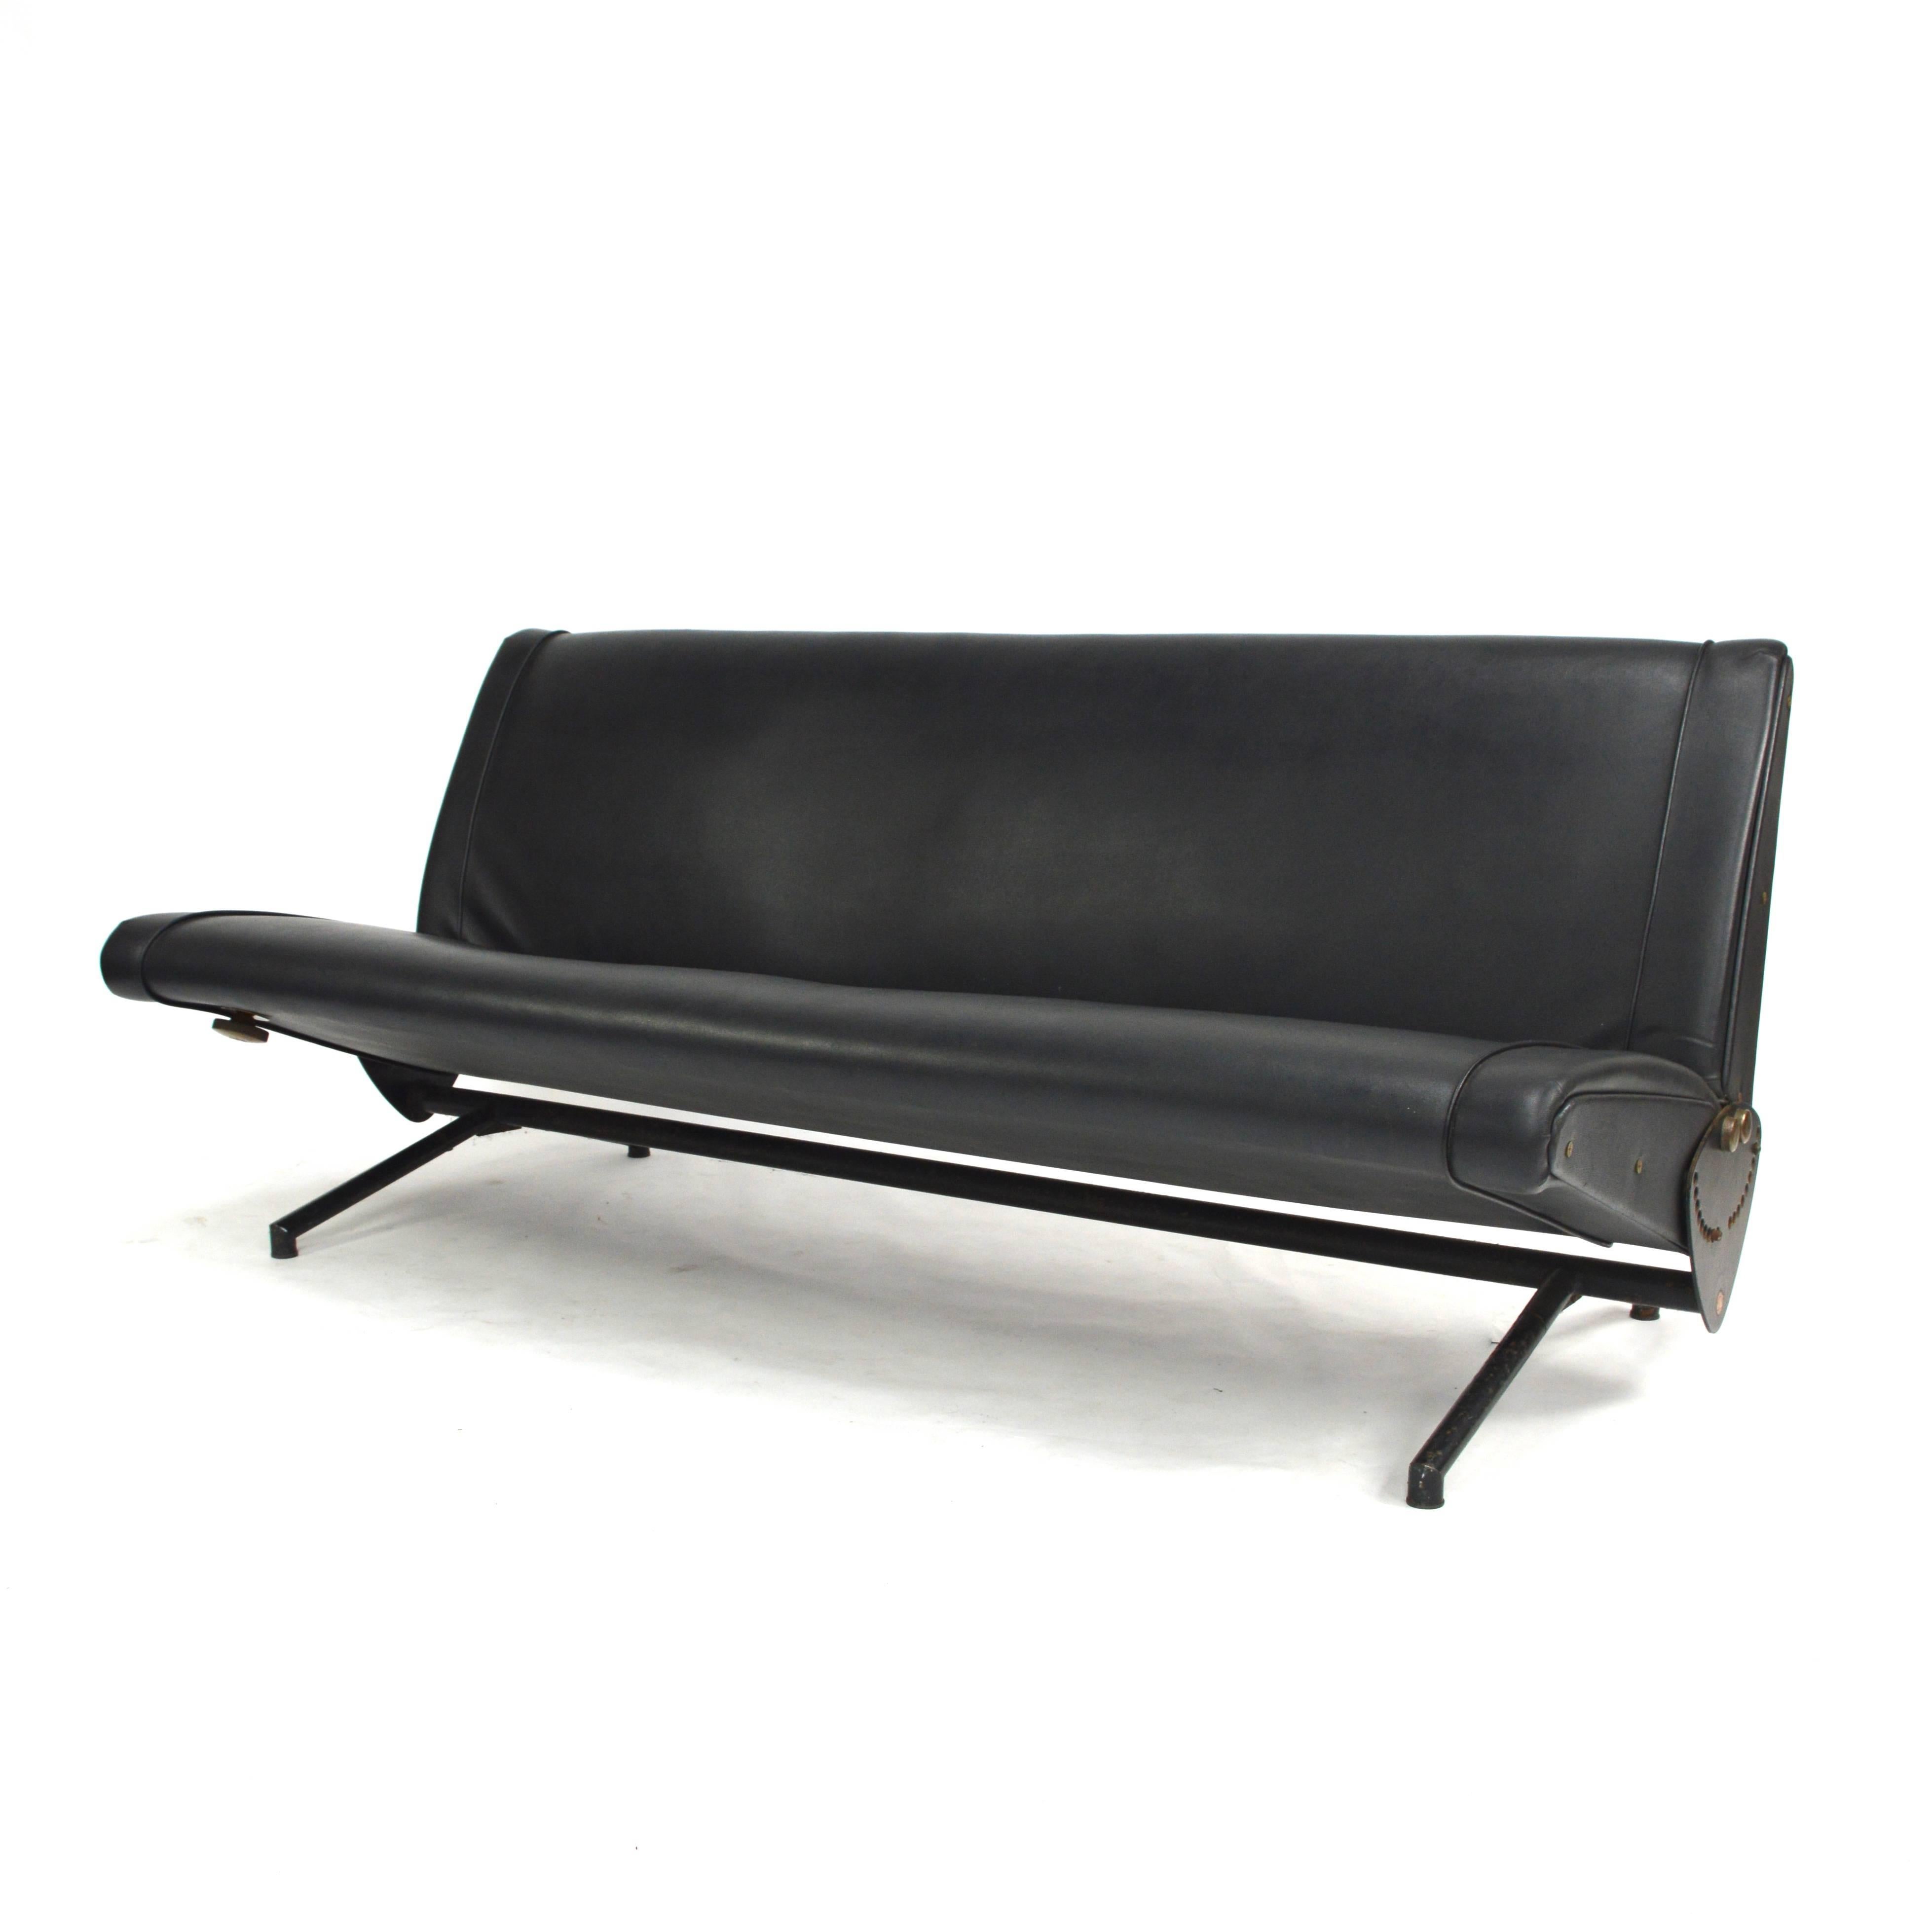 1st Edition D70 sofa by Borsani for Tecno.

The sofa has damages to the faux leather on some corners. The black laqcuered metal base has marks of use and age. The brass has patinated.

We can sell it as is or completely restored.

If you